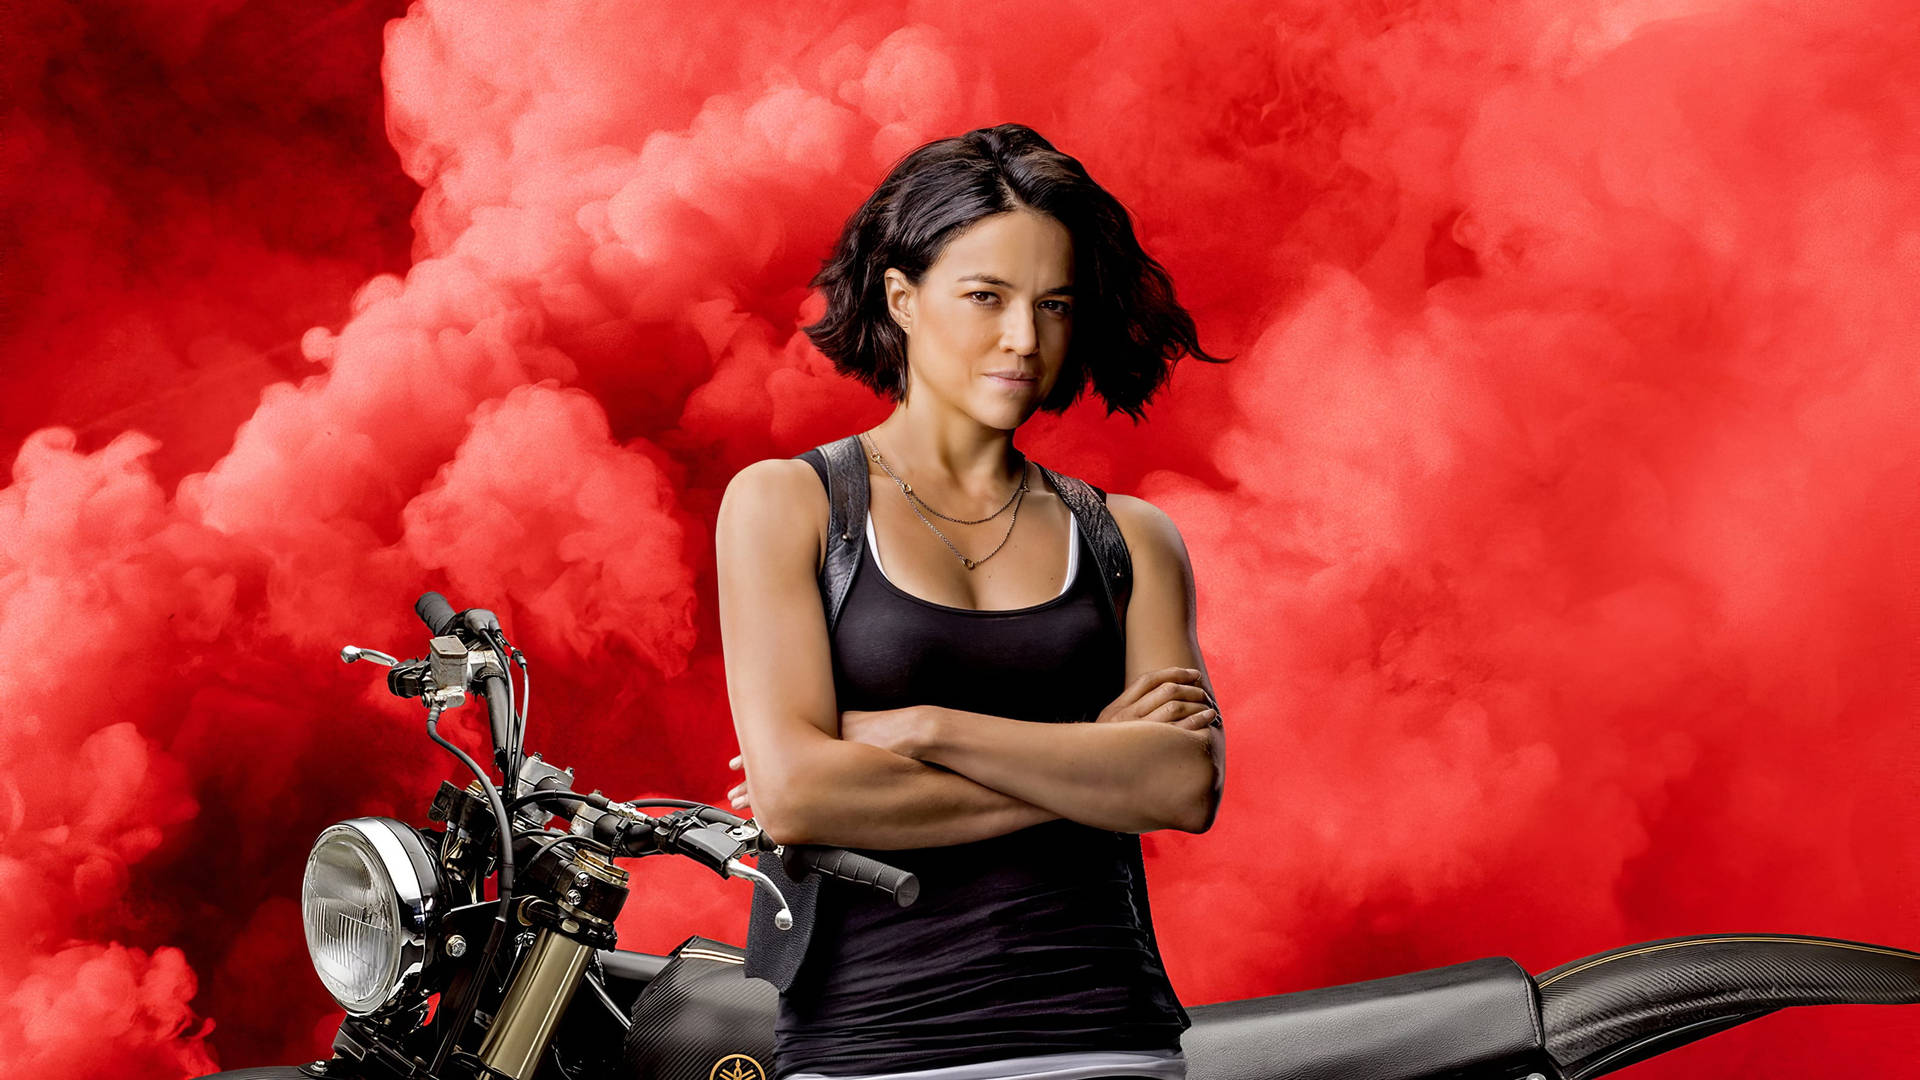 Letty Ortiz, The Fearless Racer From The Fast And Furious Series, Embodied In A Captivating Desktop Image.